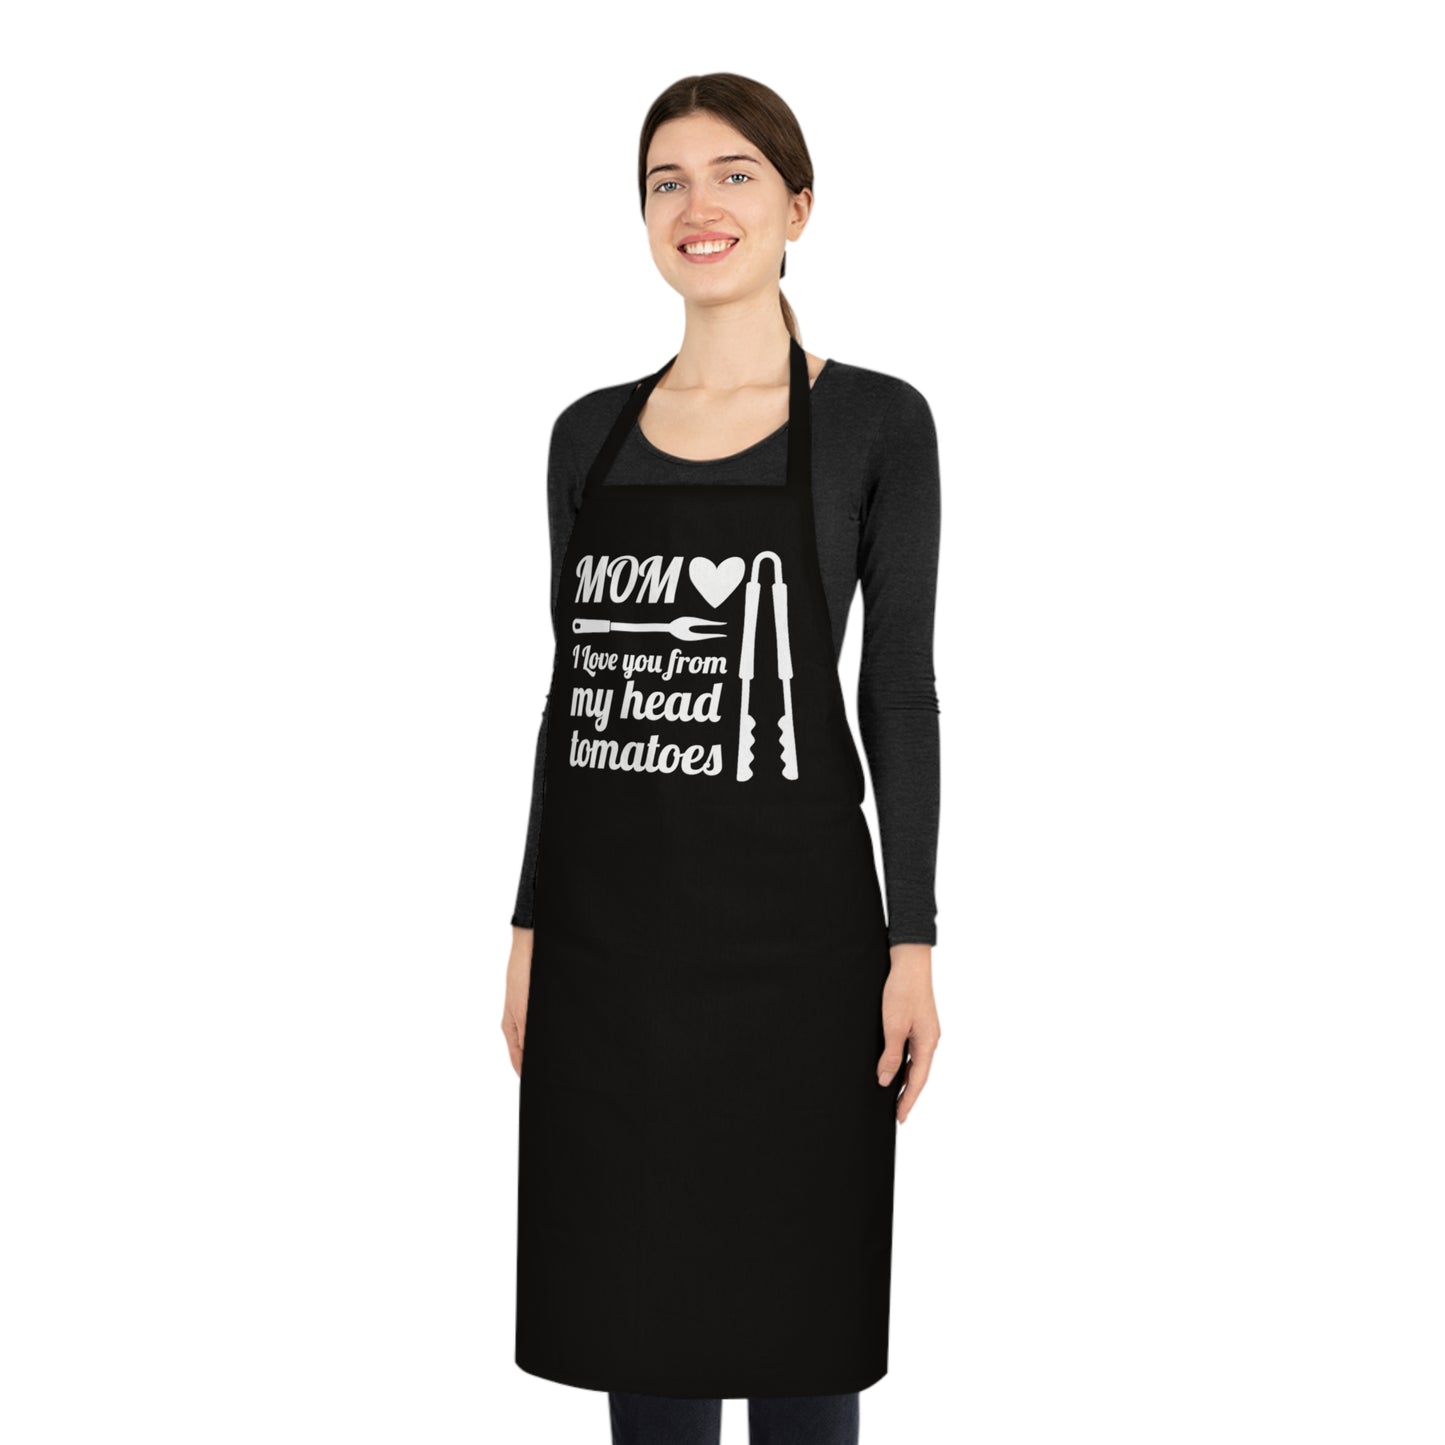 MOM, I love you from my head tomatoes, Cotton Apron